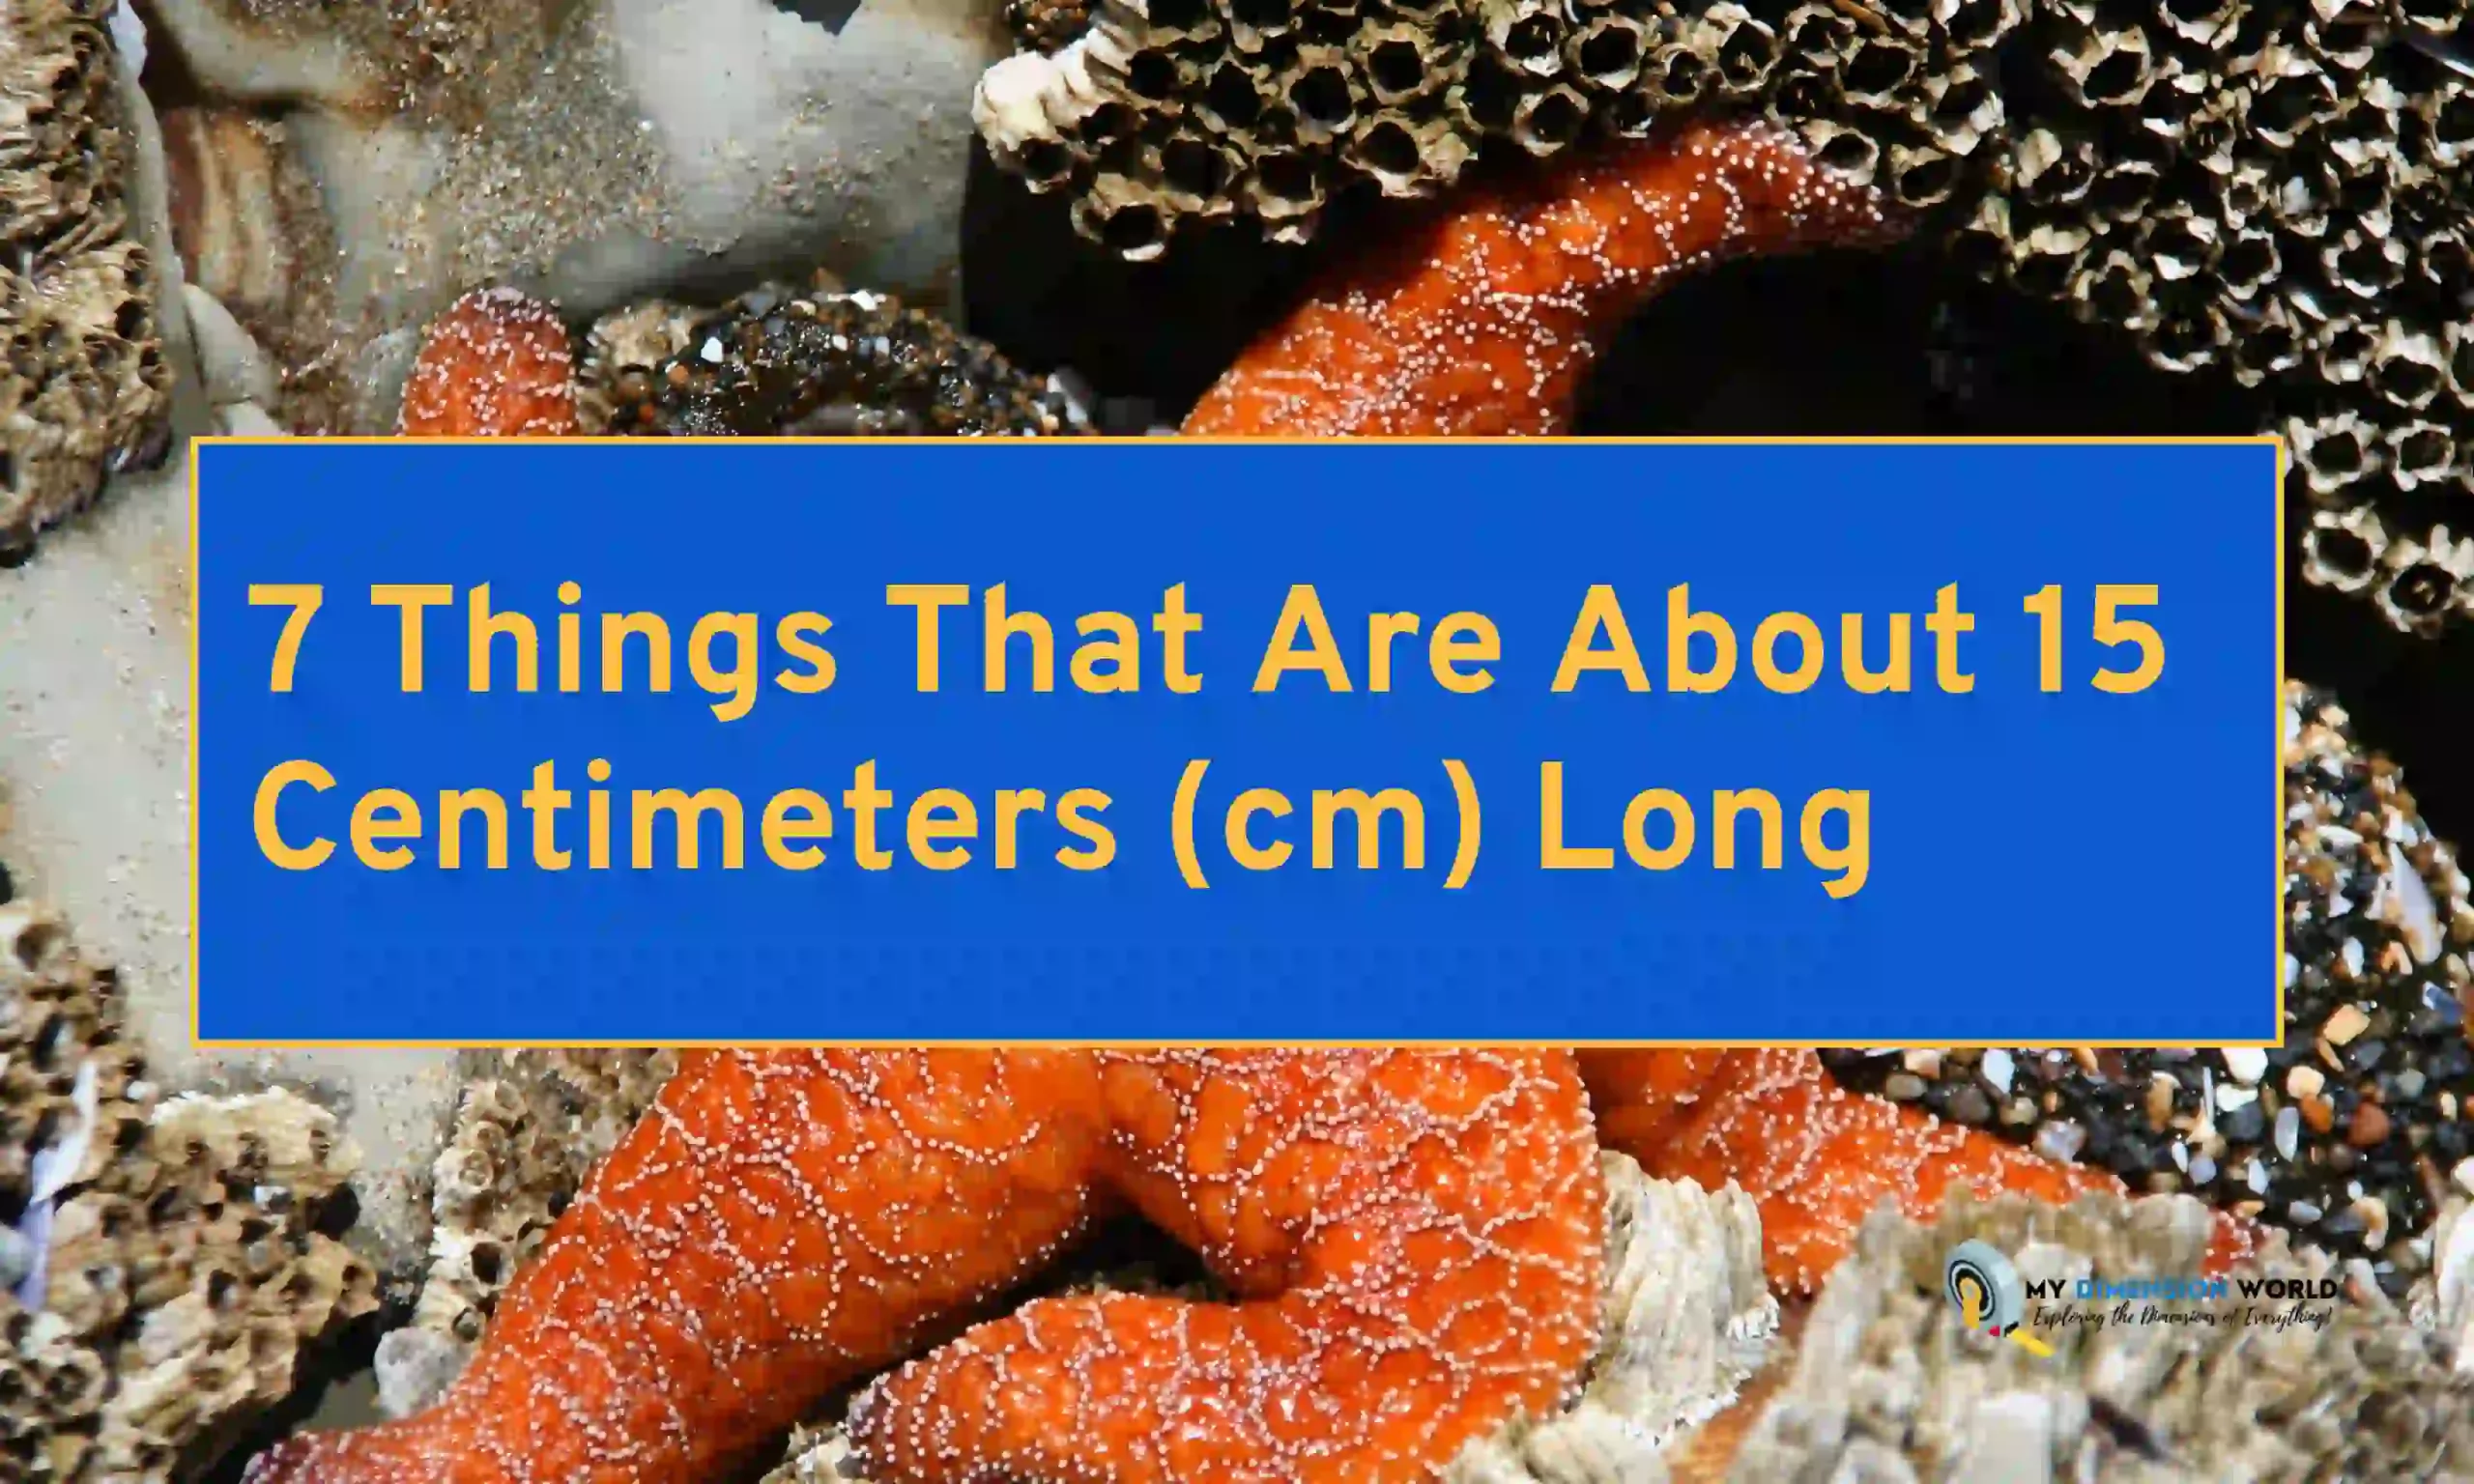 7 Things That Are About 15 Centimeters (cm) Long